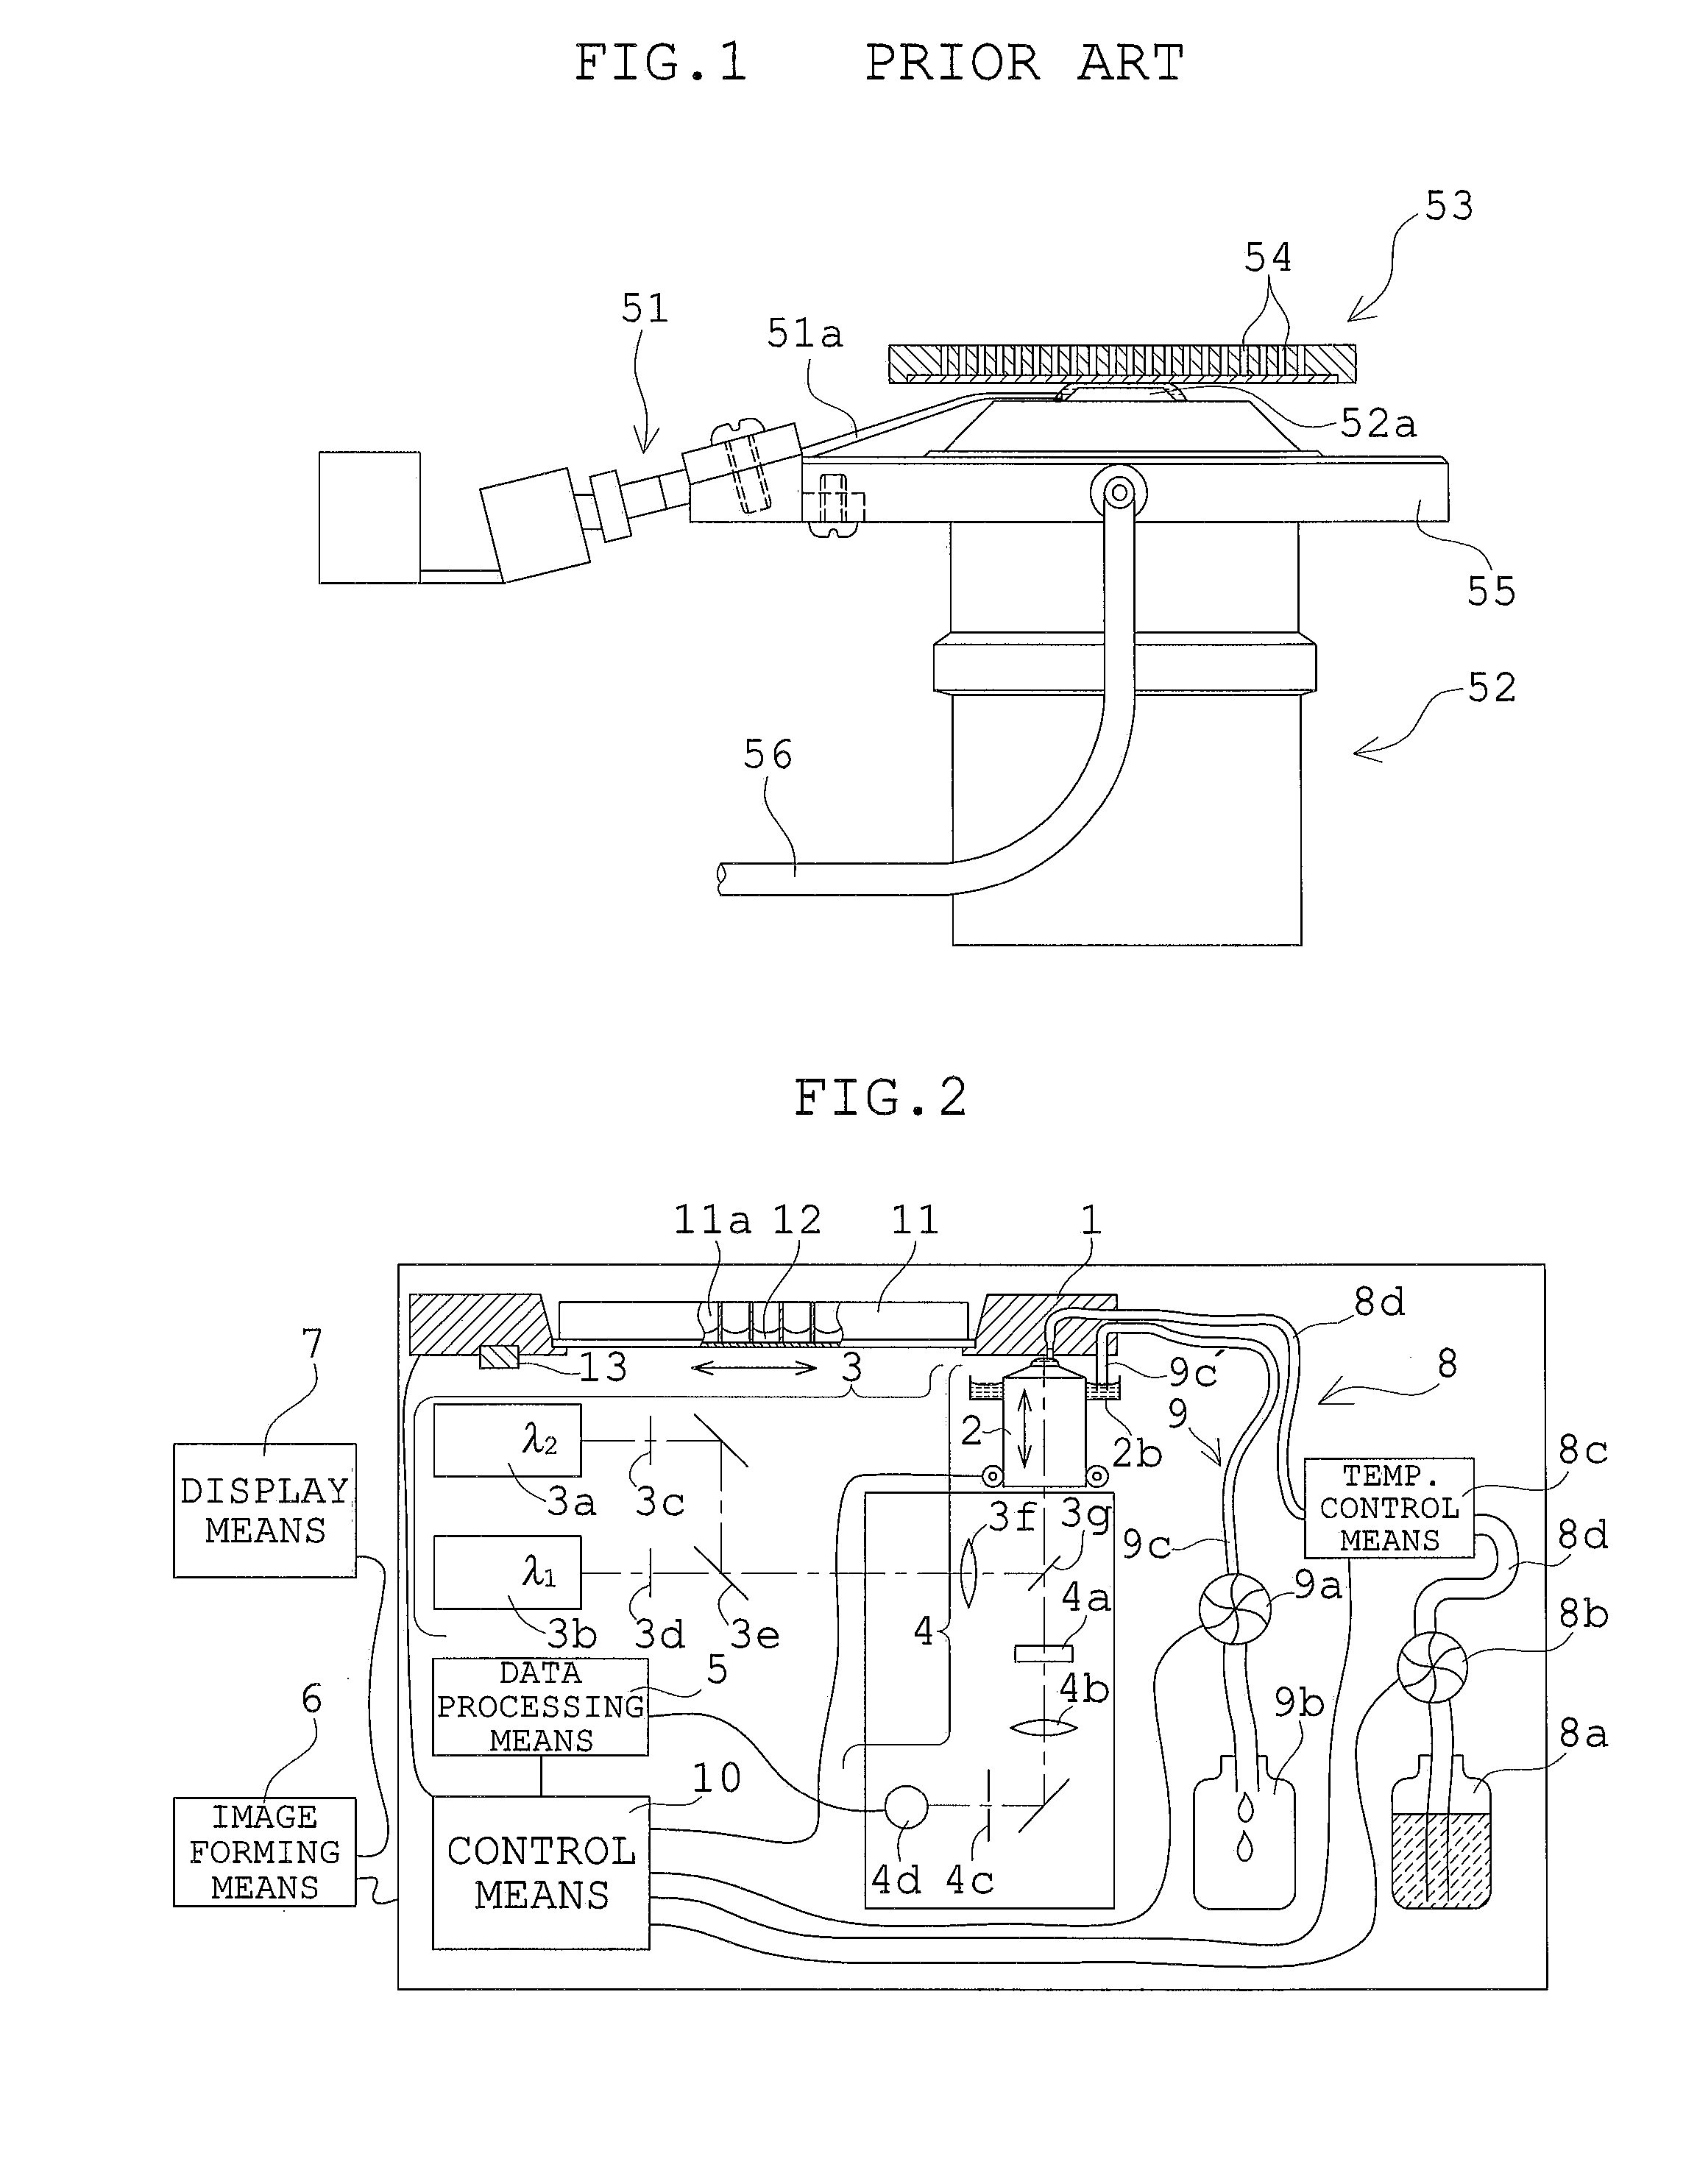 Observation apparatus provided with immersion objective lens